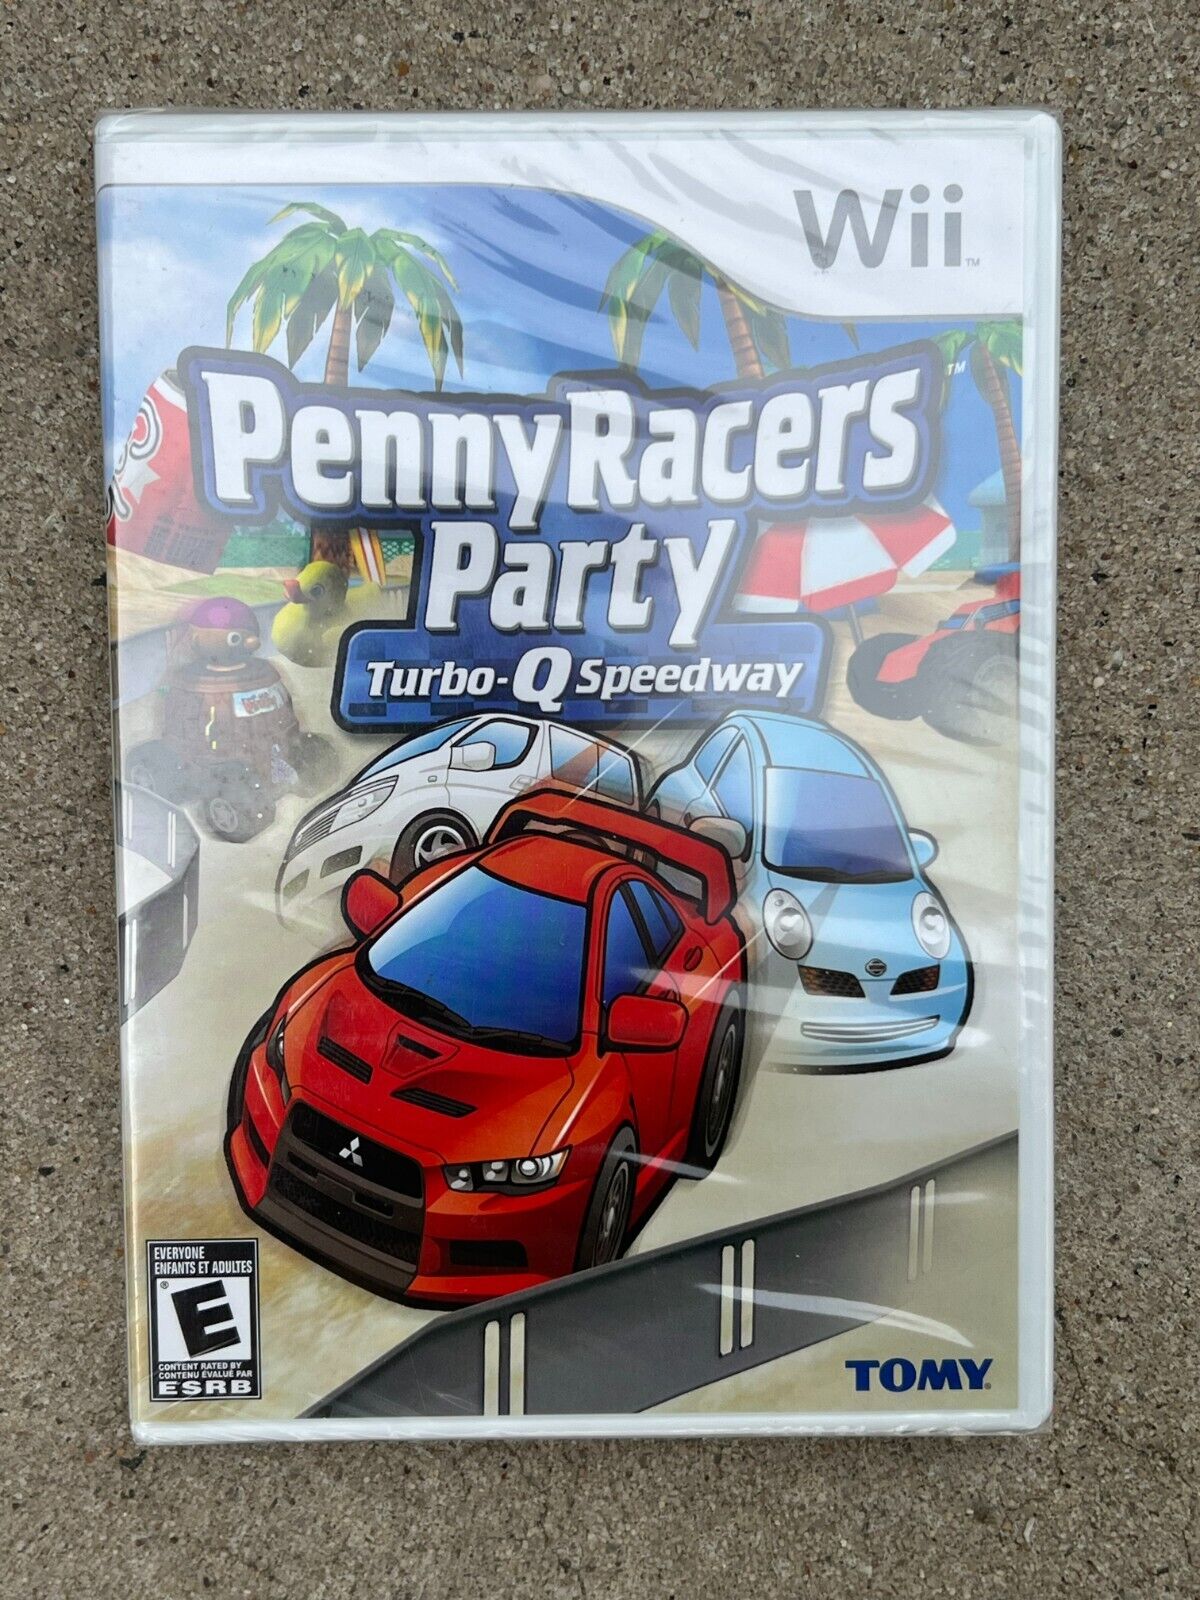 Penny Racers Party: Turbo-Q Speedway (Nintendo Wii, 2008) New / Sealed